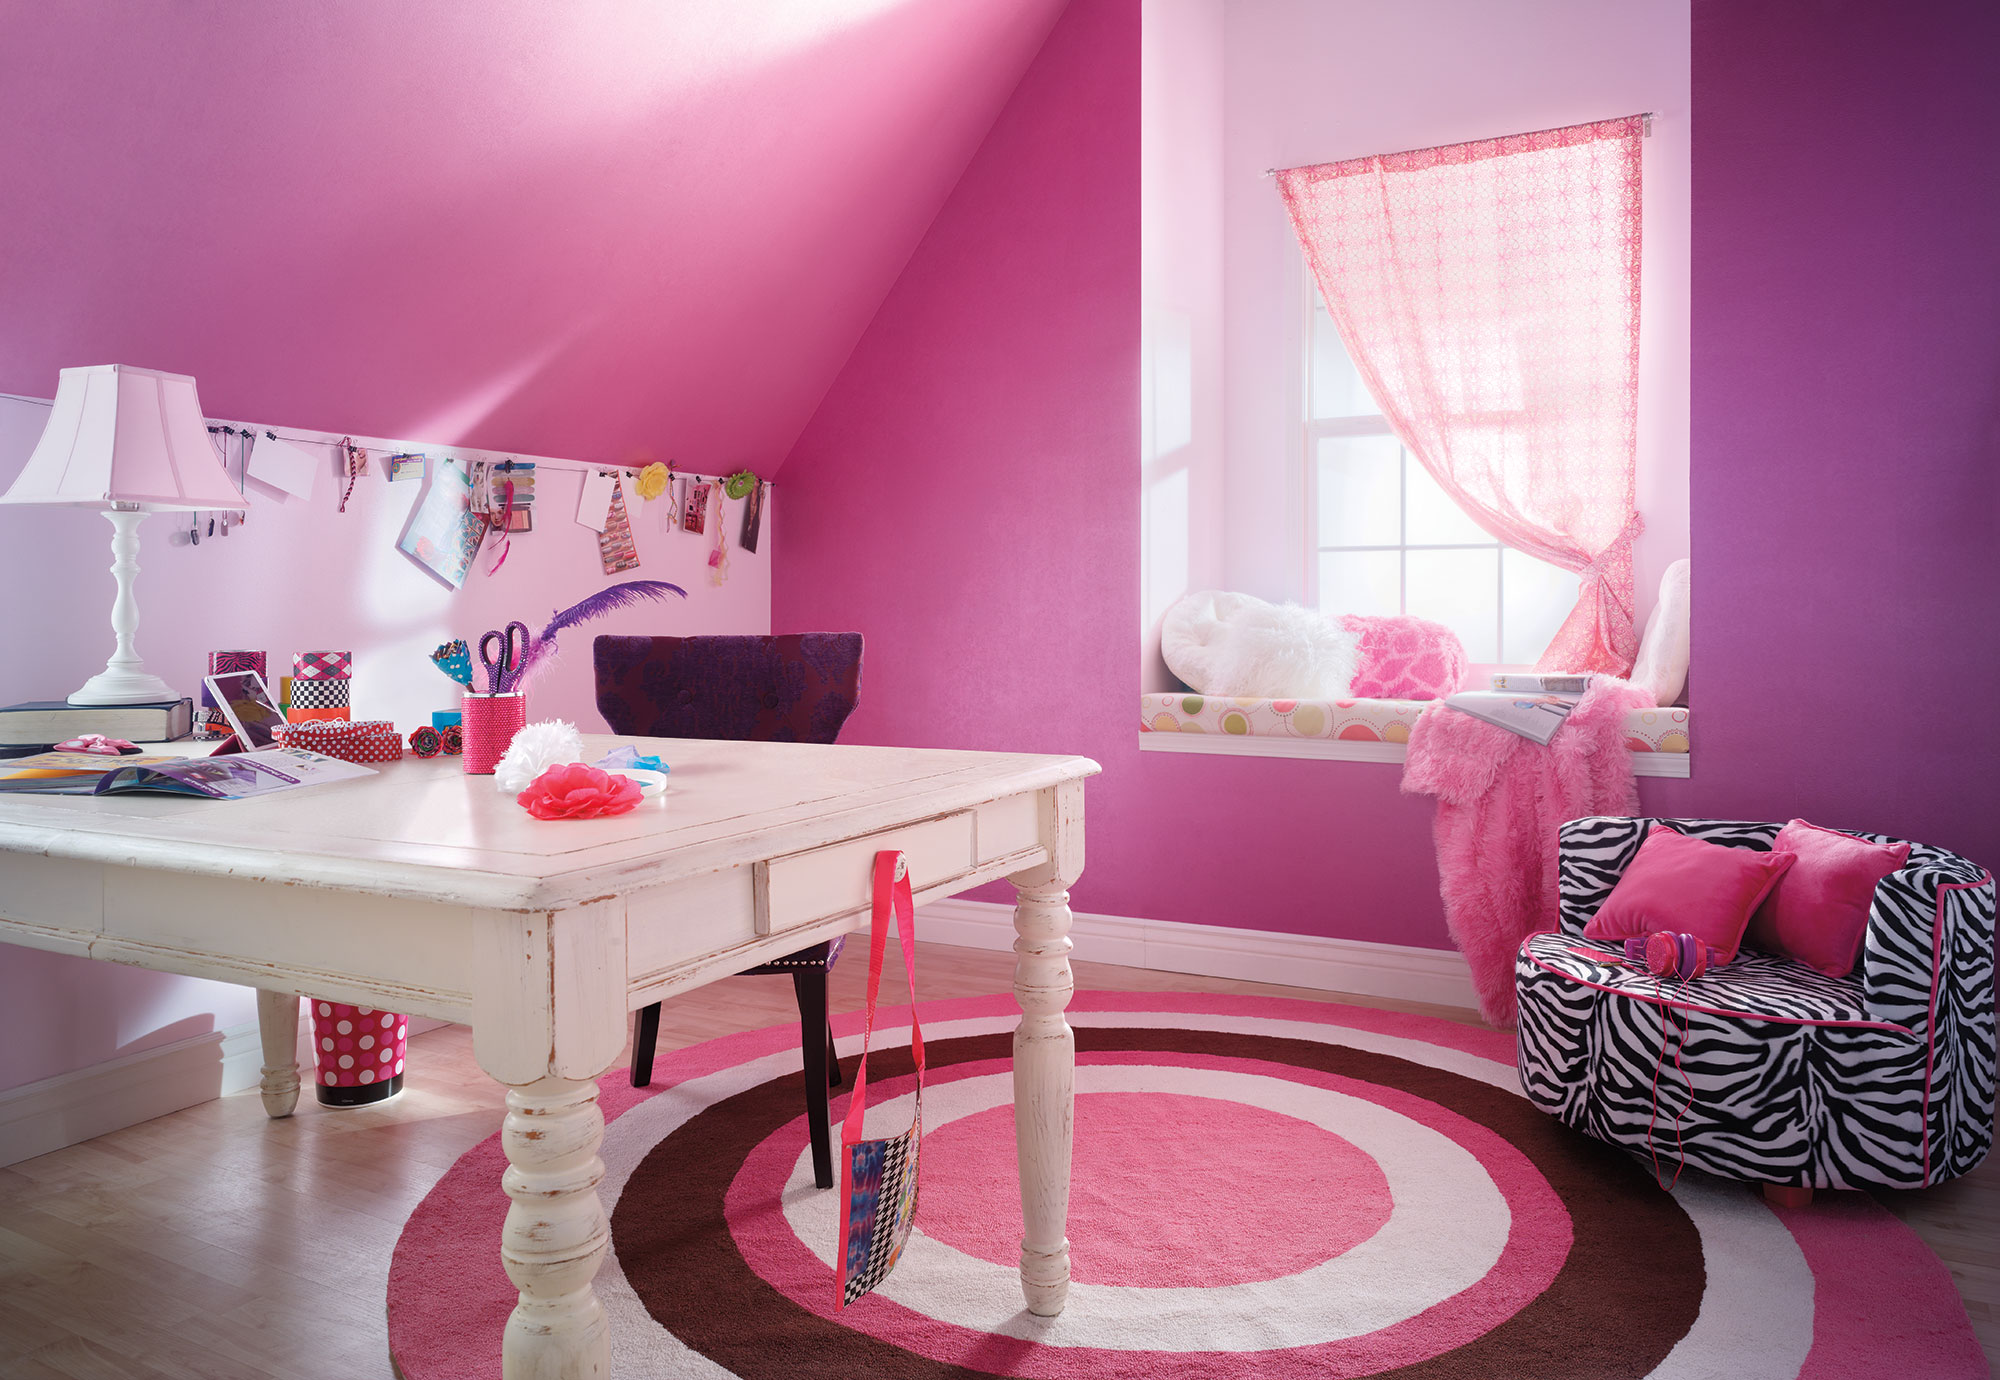 Pink and Zebra Themed Room